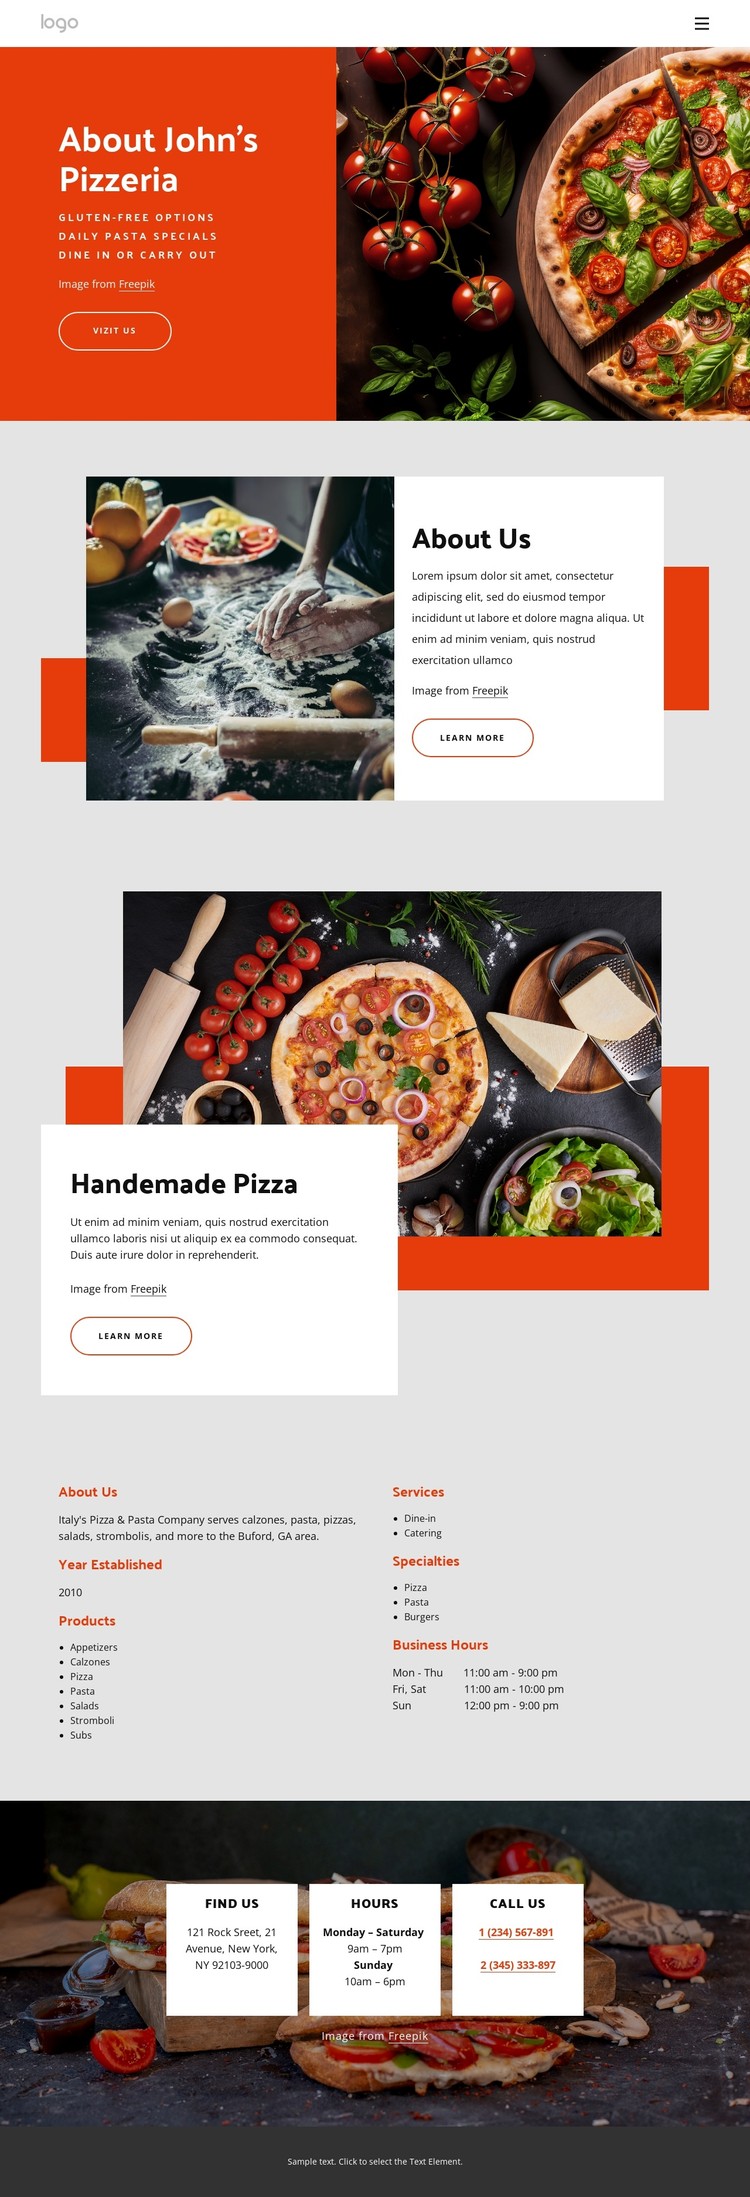 About our pizzeria Static Site Generator